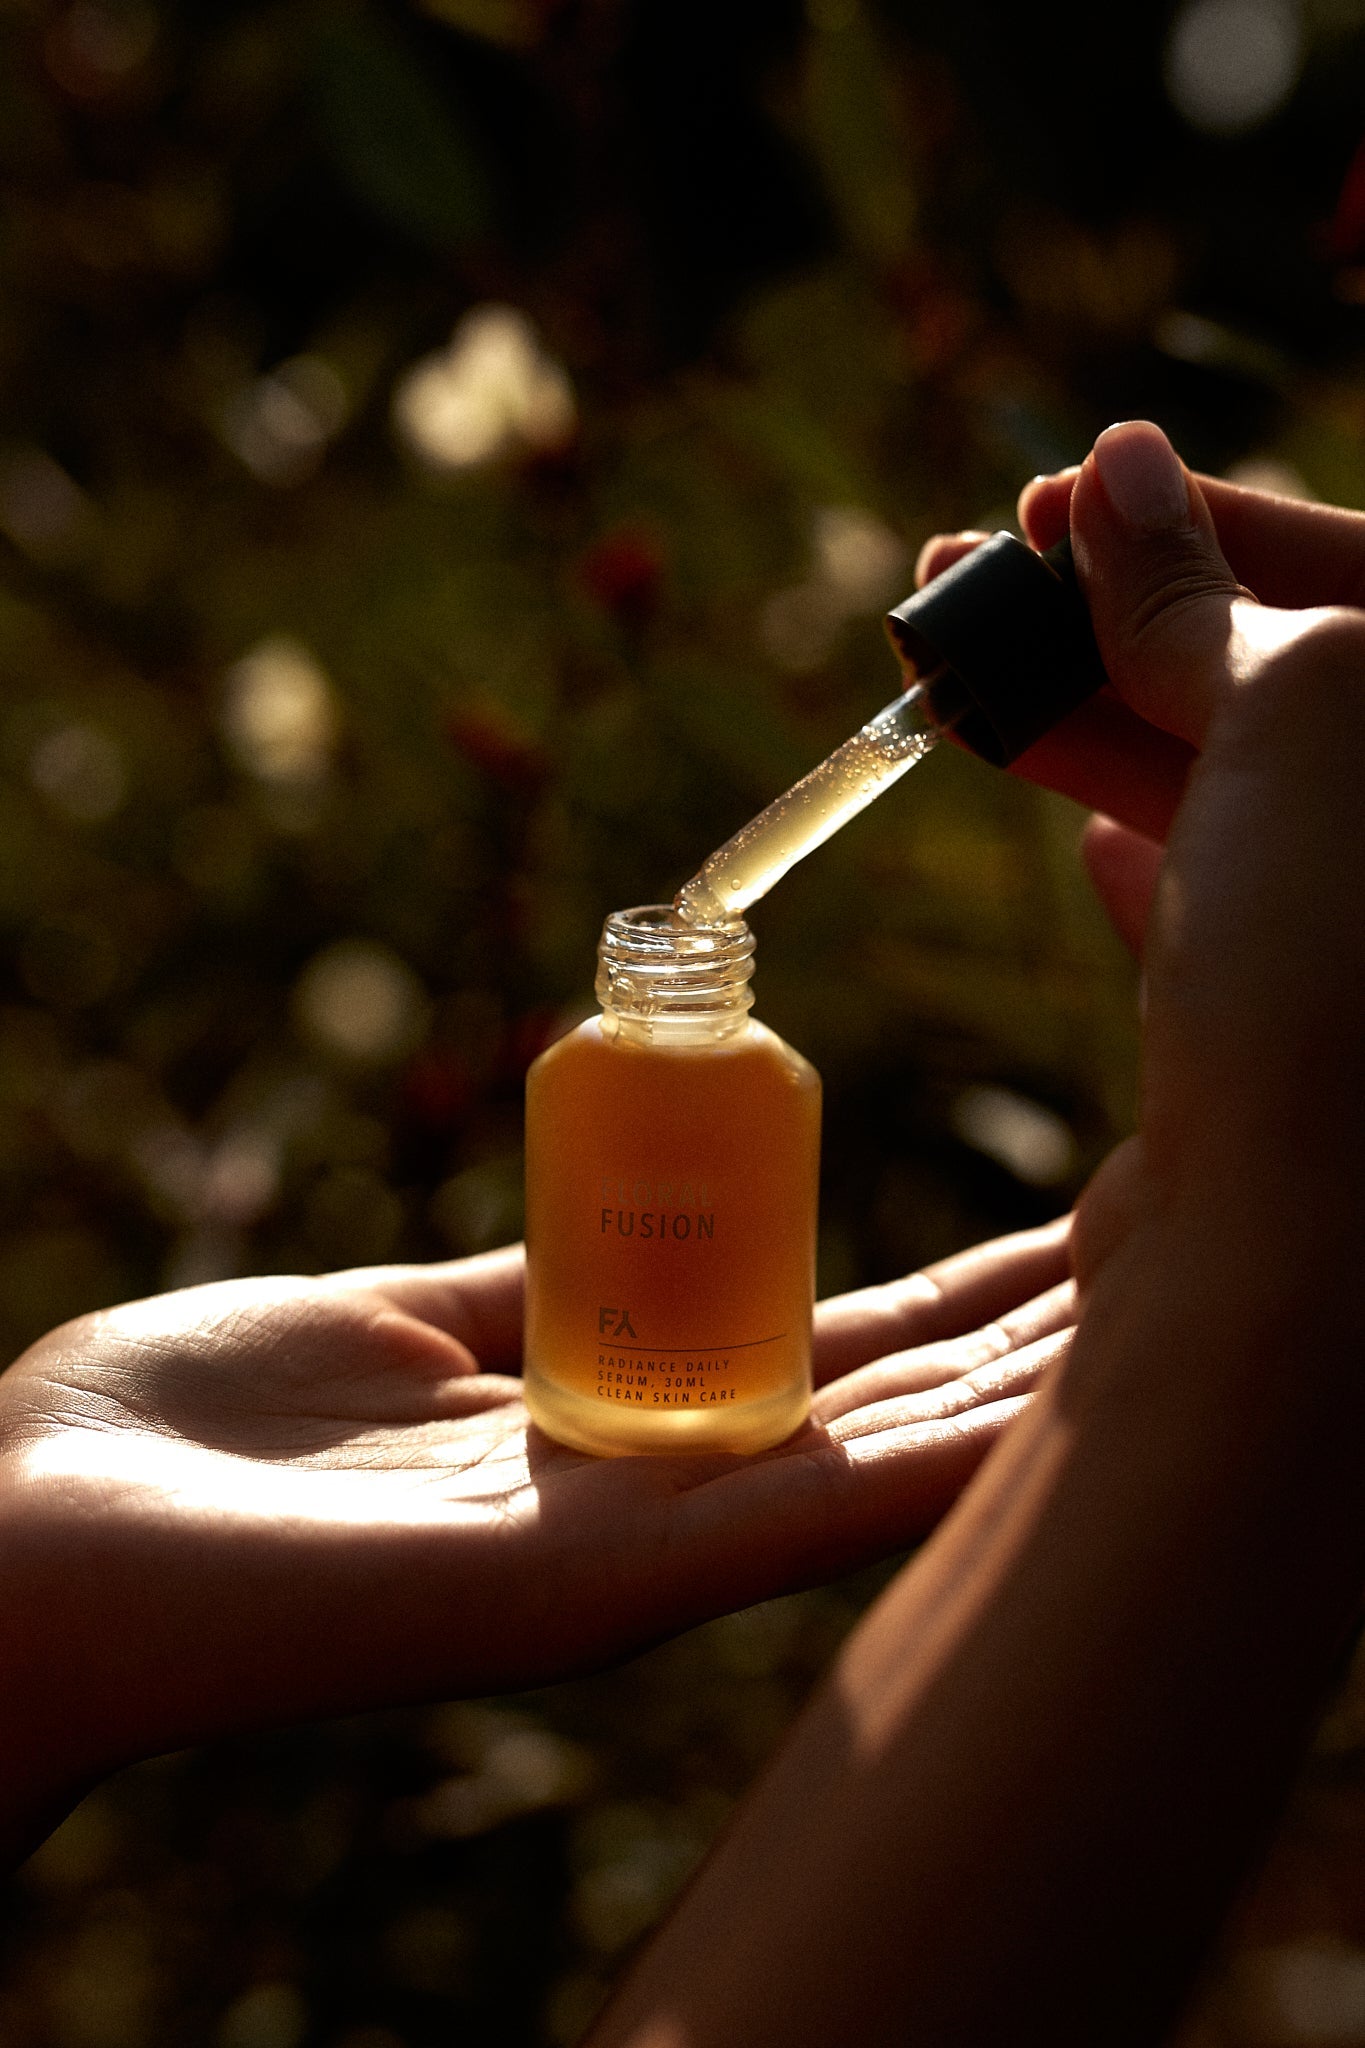 Campaign shot showing the Floral Fusion Radiance Daily Serum by Fields of Yarrow being used